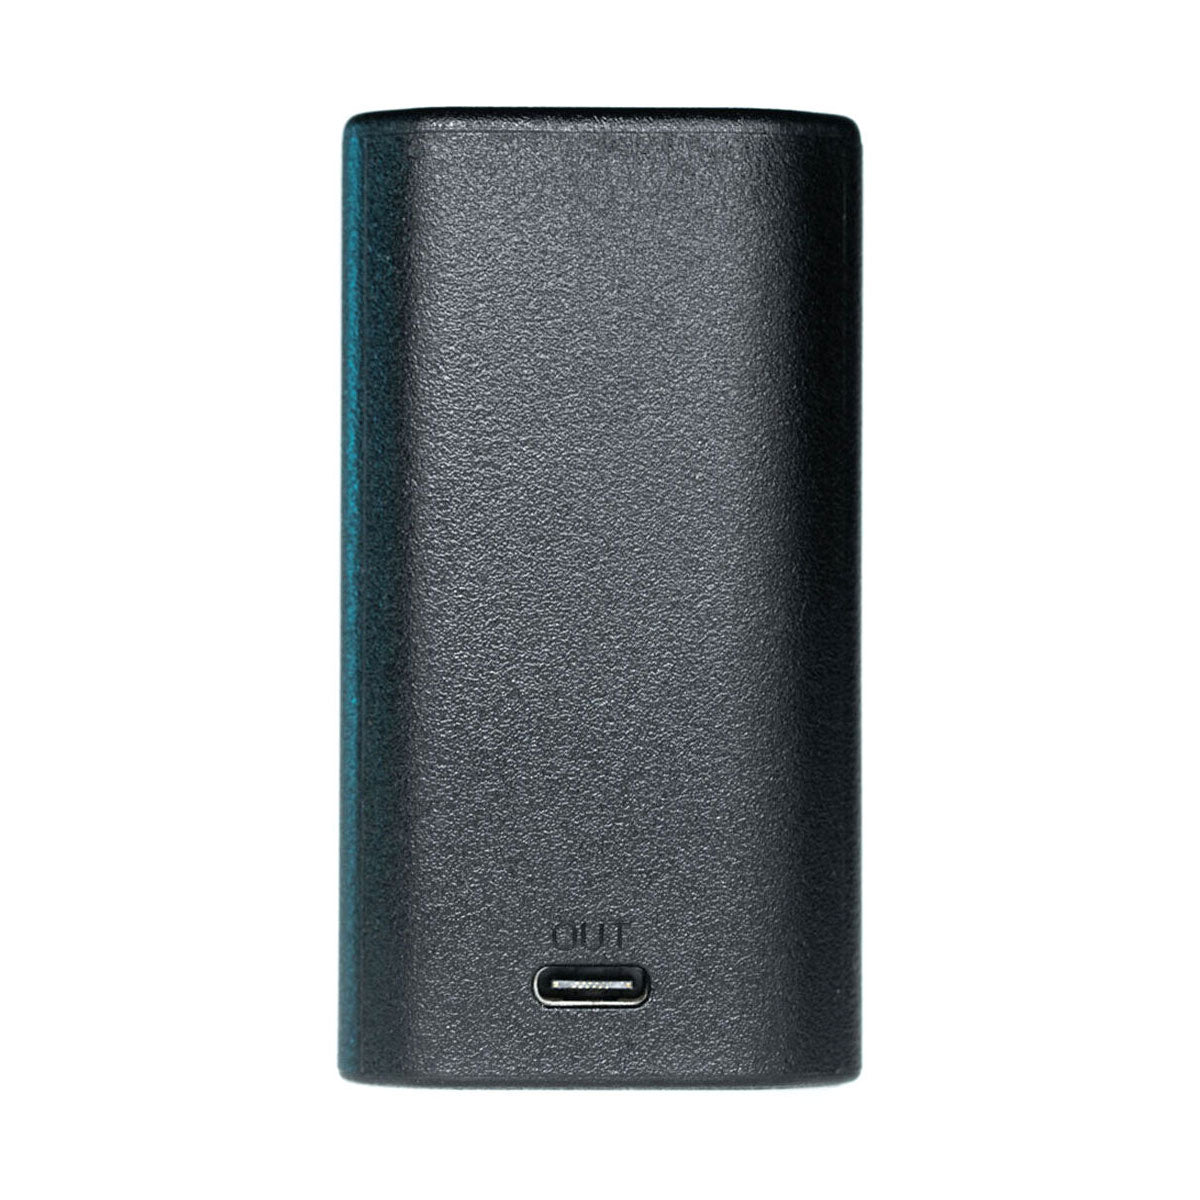 Jupio Tri-Charge for Sony NP-FZ100 Battery